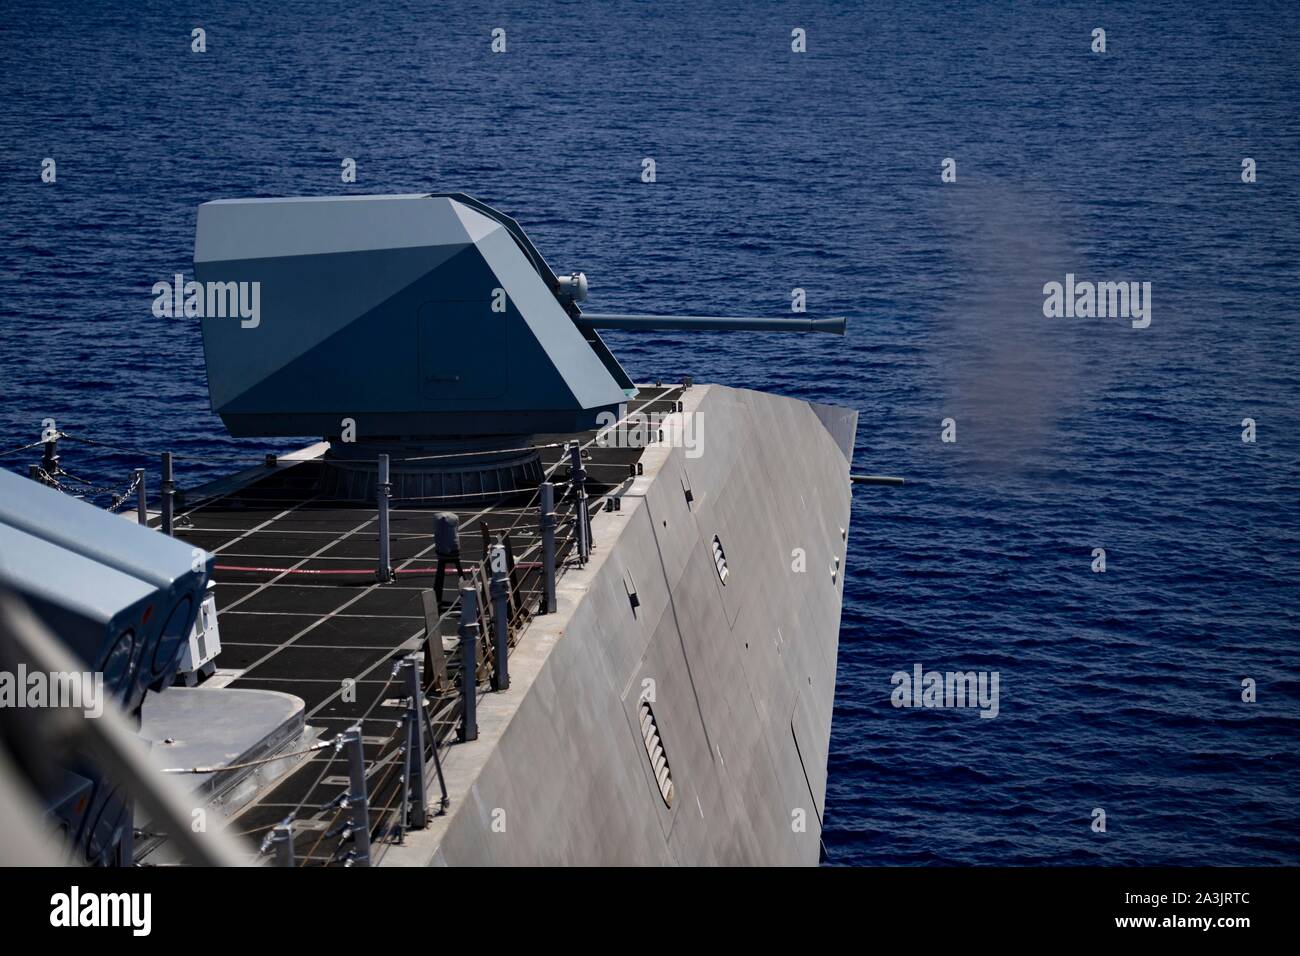 191006-N-YI115-1186 PHILIPPINE SEA (Oct. 6, 2019) Independence-variant littoral combat ship USS Gabrielle Giffords (LCS 10) engages a high-speed maneuvering surface target  with a MK 110 57mm gun during a live-fire exercise as part of Exercise Pacific Griffin 2019. Pacific Griffin is a biennial exercise conducted in the waters near Guam aimed at enhancing combined proficiency at sea while strengthening relationships between the U.S. and Republic of Singapore navies. (U.S. Navy photo by Mass Communication Specialist 3rd Class Josiah J. Kunkle/Released) Stock Photo